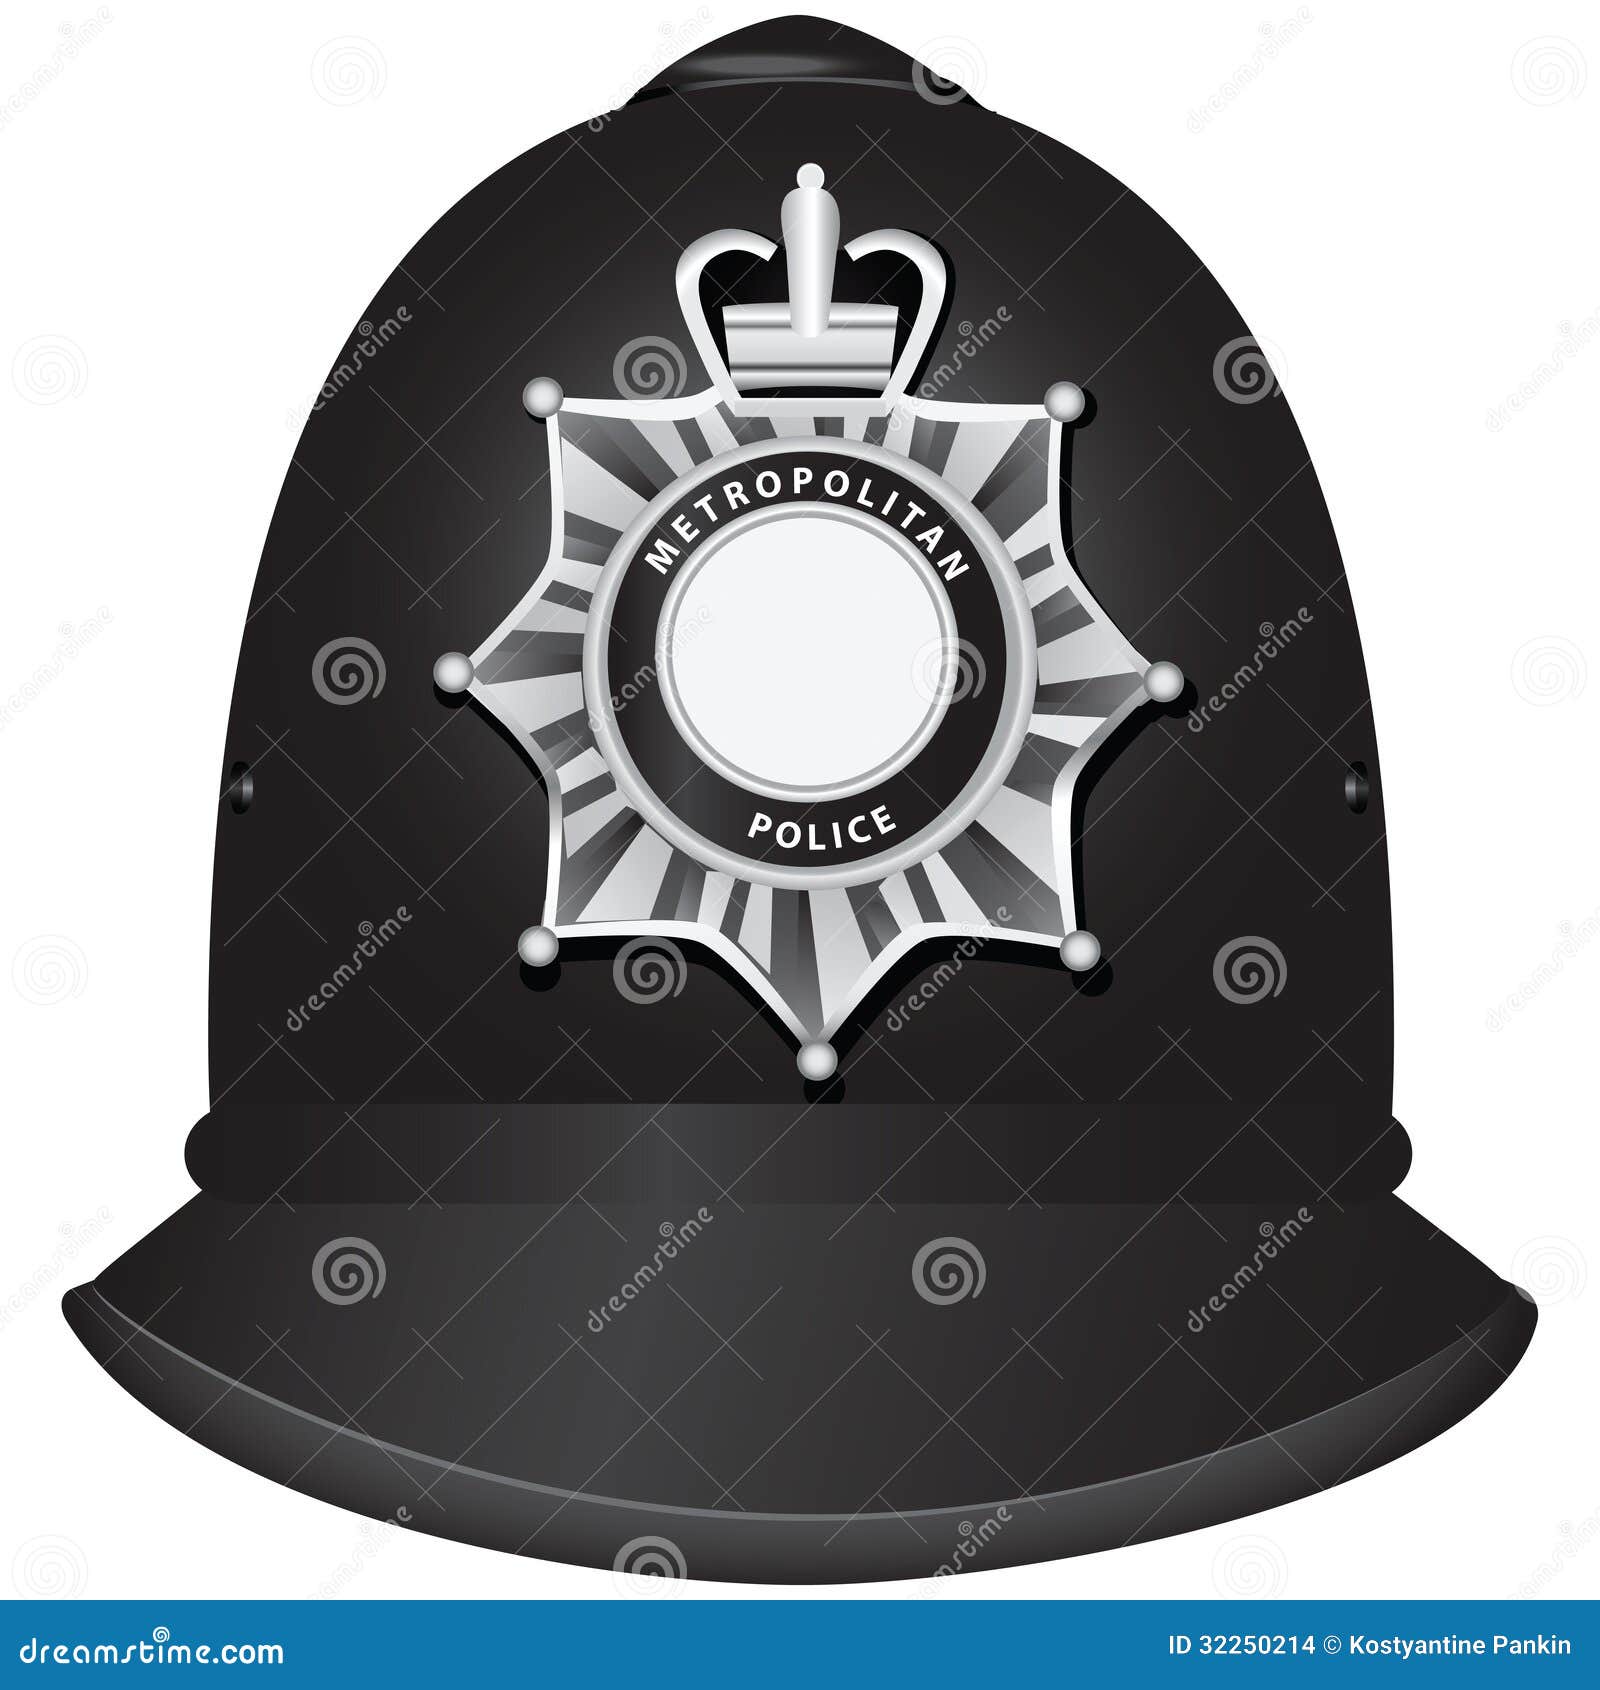 policeman hat clipart - photo #49